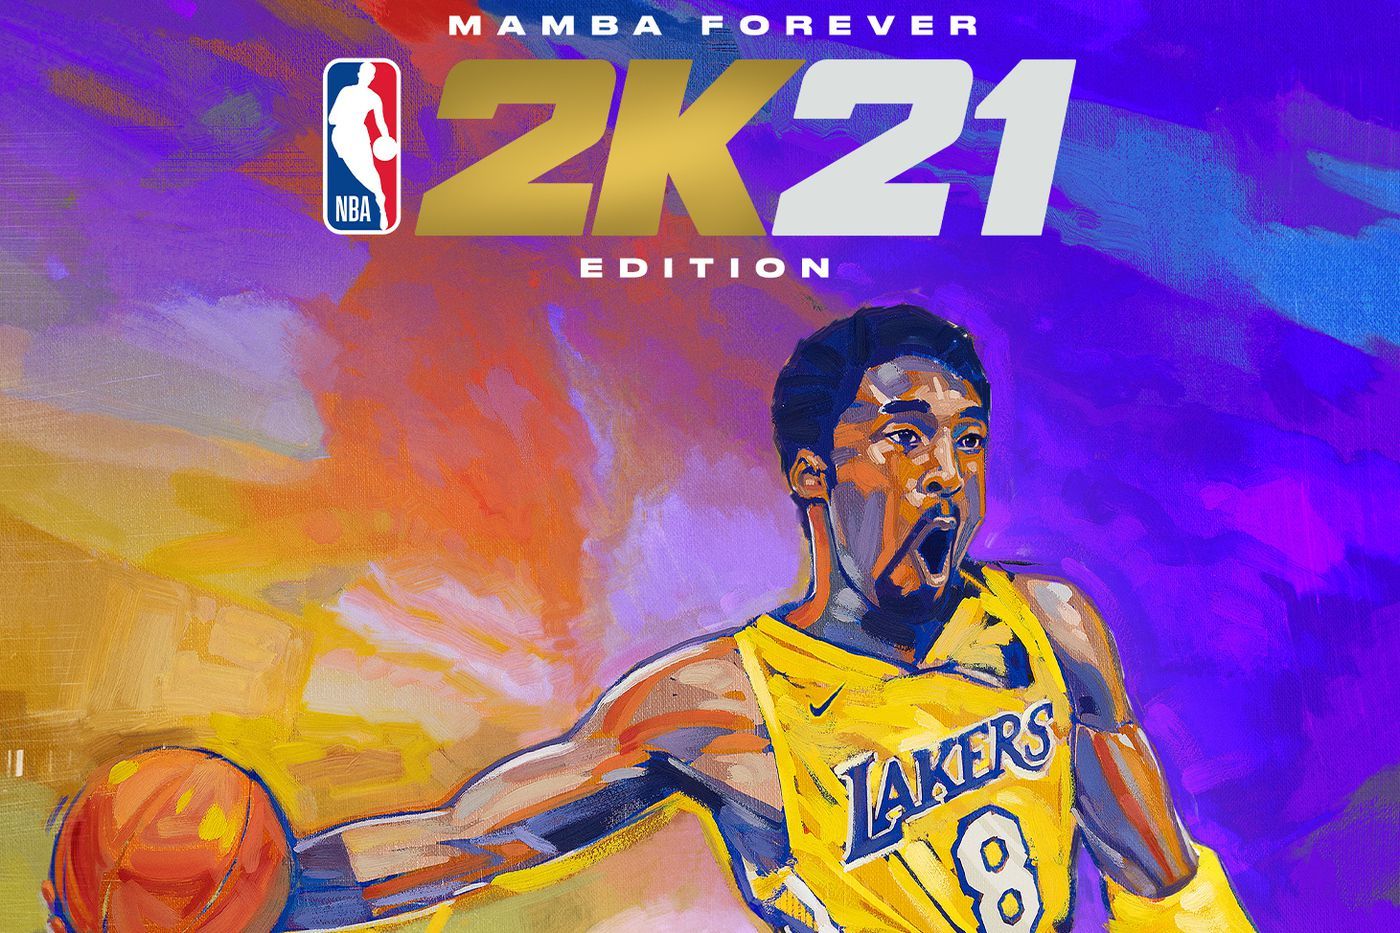 Kobe Bryant will be on the NBA 2K21 cover Screen and Roll